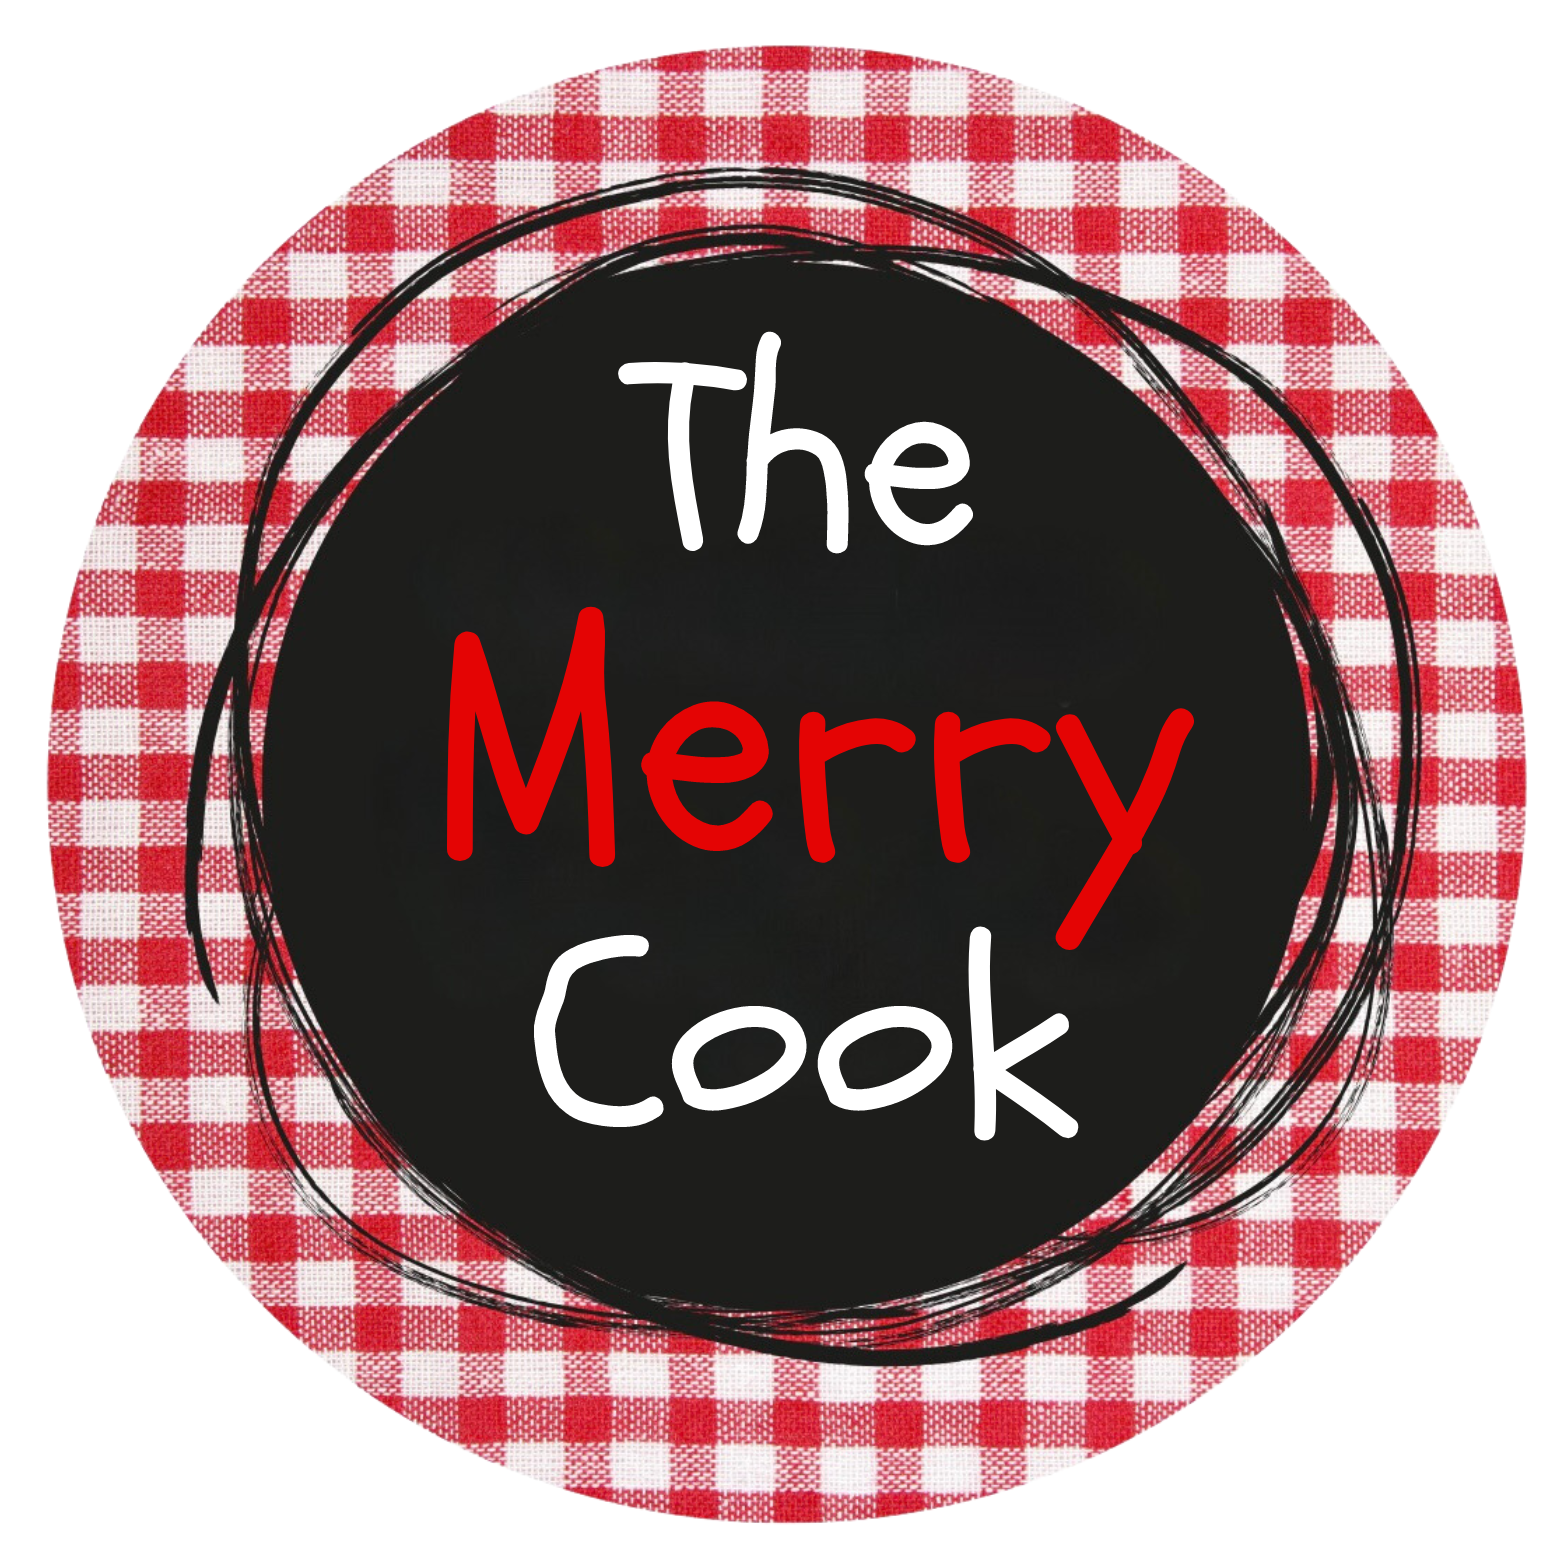 The Merry Cook